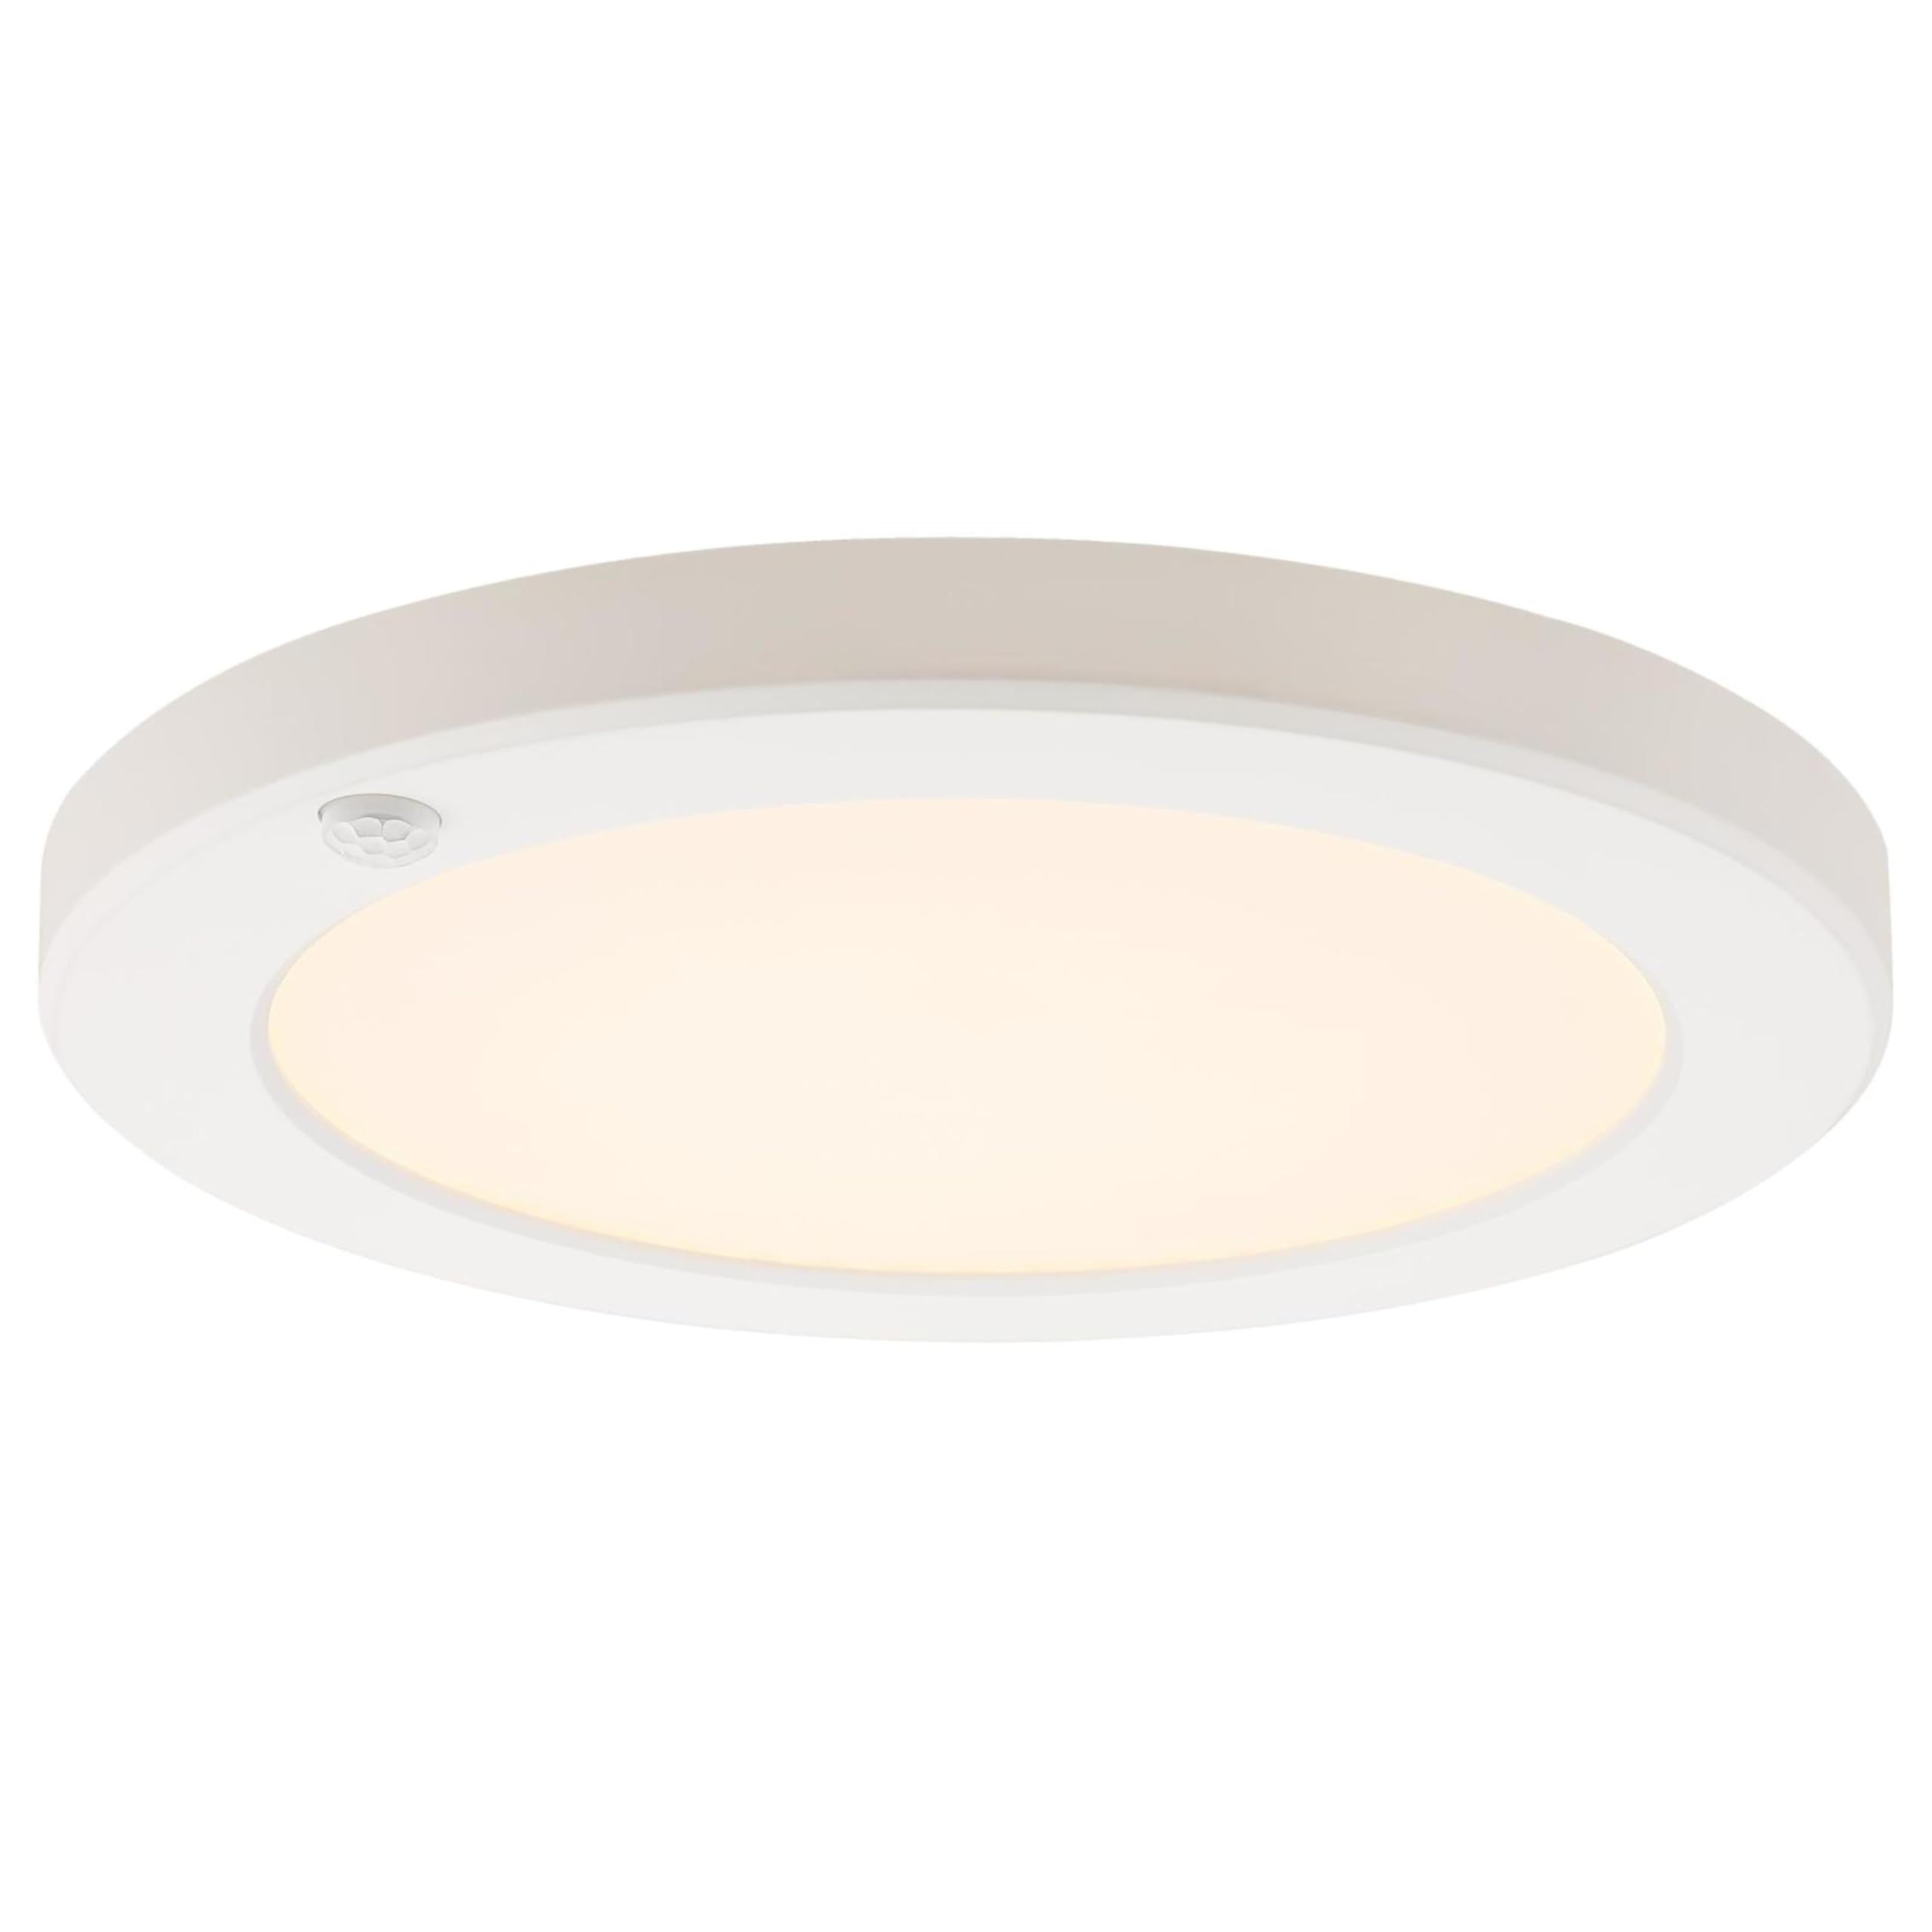 Westinghouse Lighting 6133200 8 Inch 18 Watt LED Indoor Flush Mount Fixture with Motion Sensor and Color Temperature Selection, 3000K, 4000K, 5000K, White Finish with White Acrylic Shade